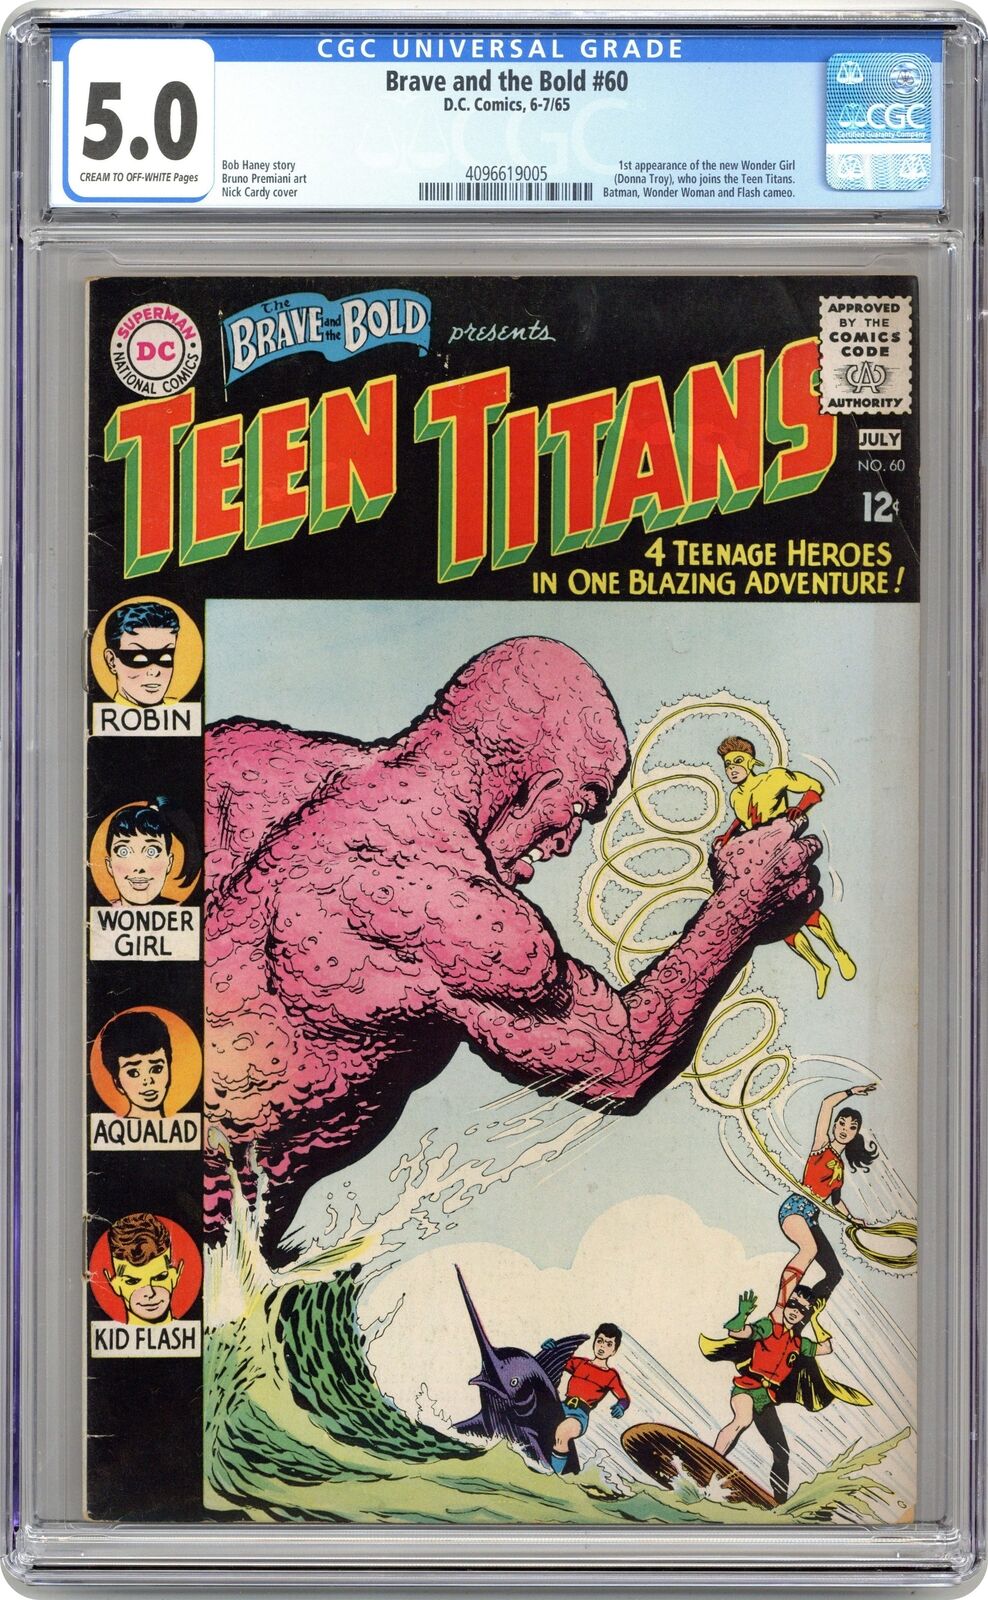 Brave and the Bold #60 CGC 5.0 1965 4096619005 2nd app. Teen Titans